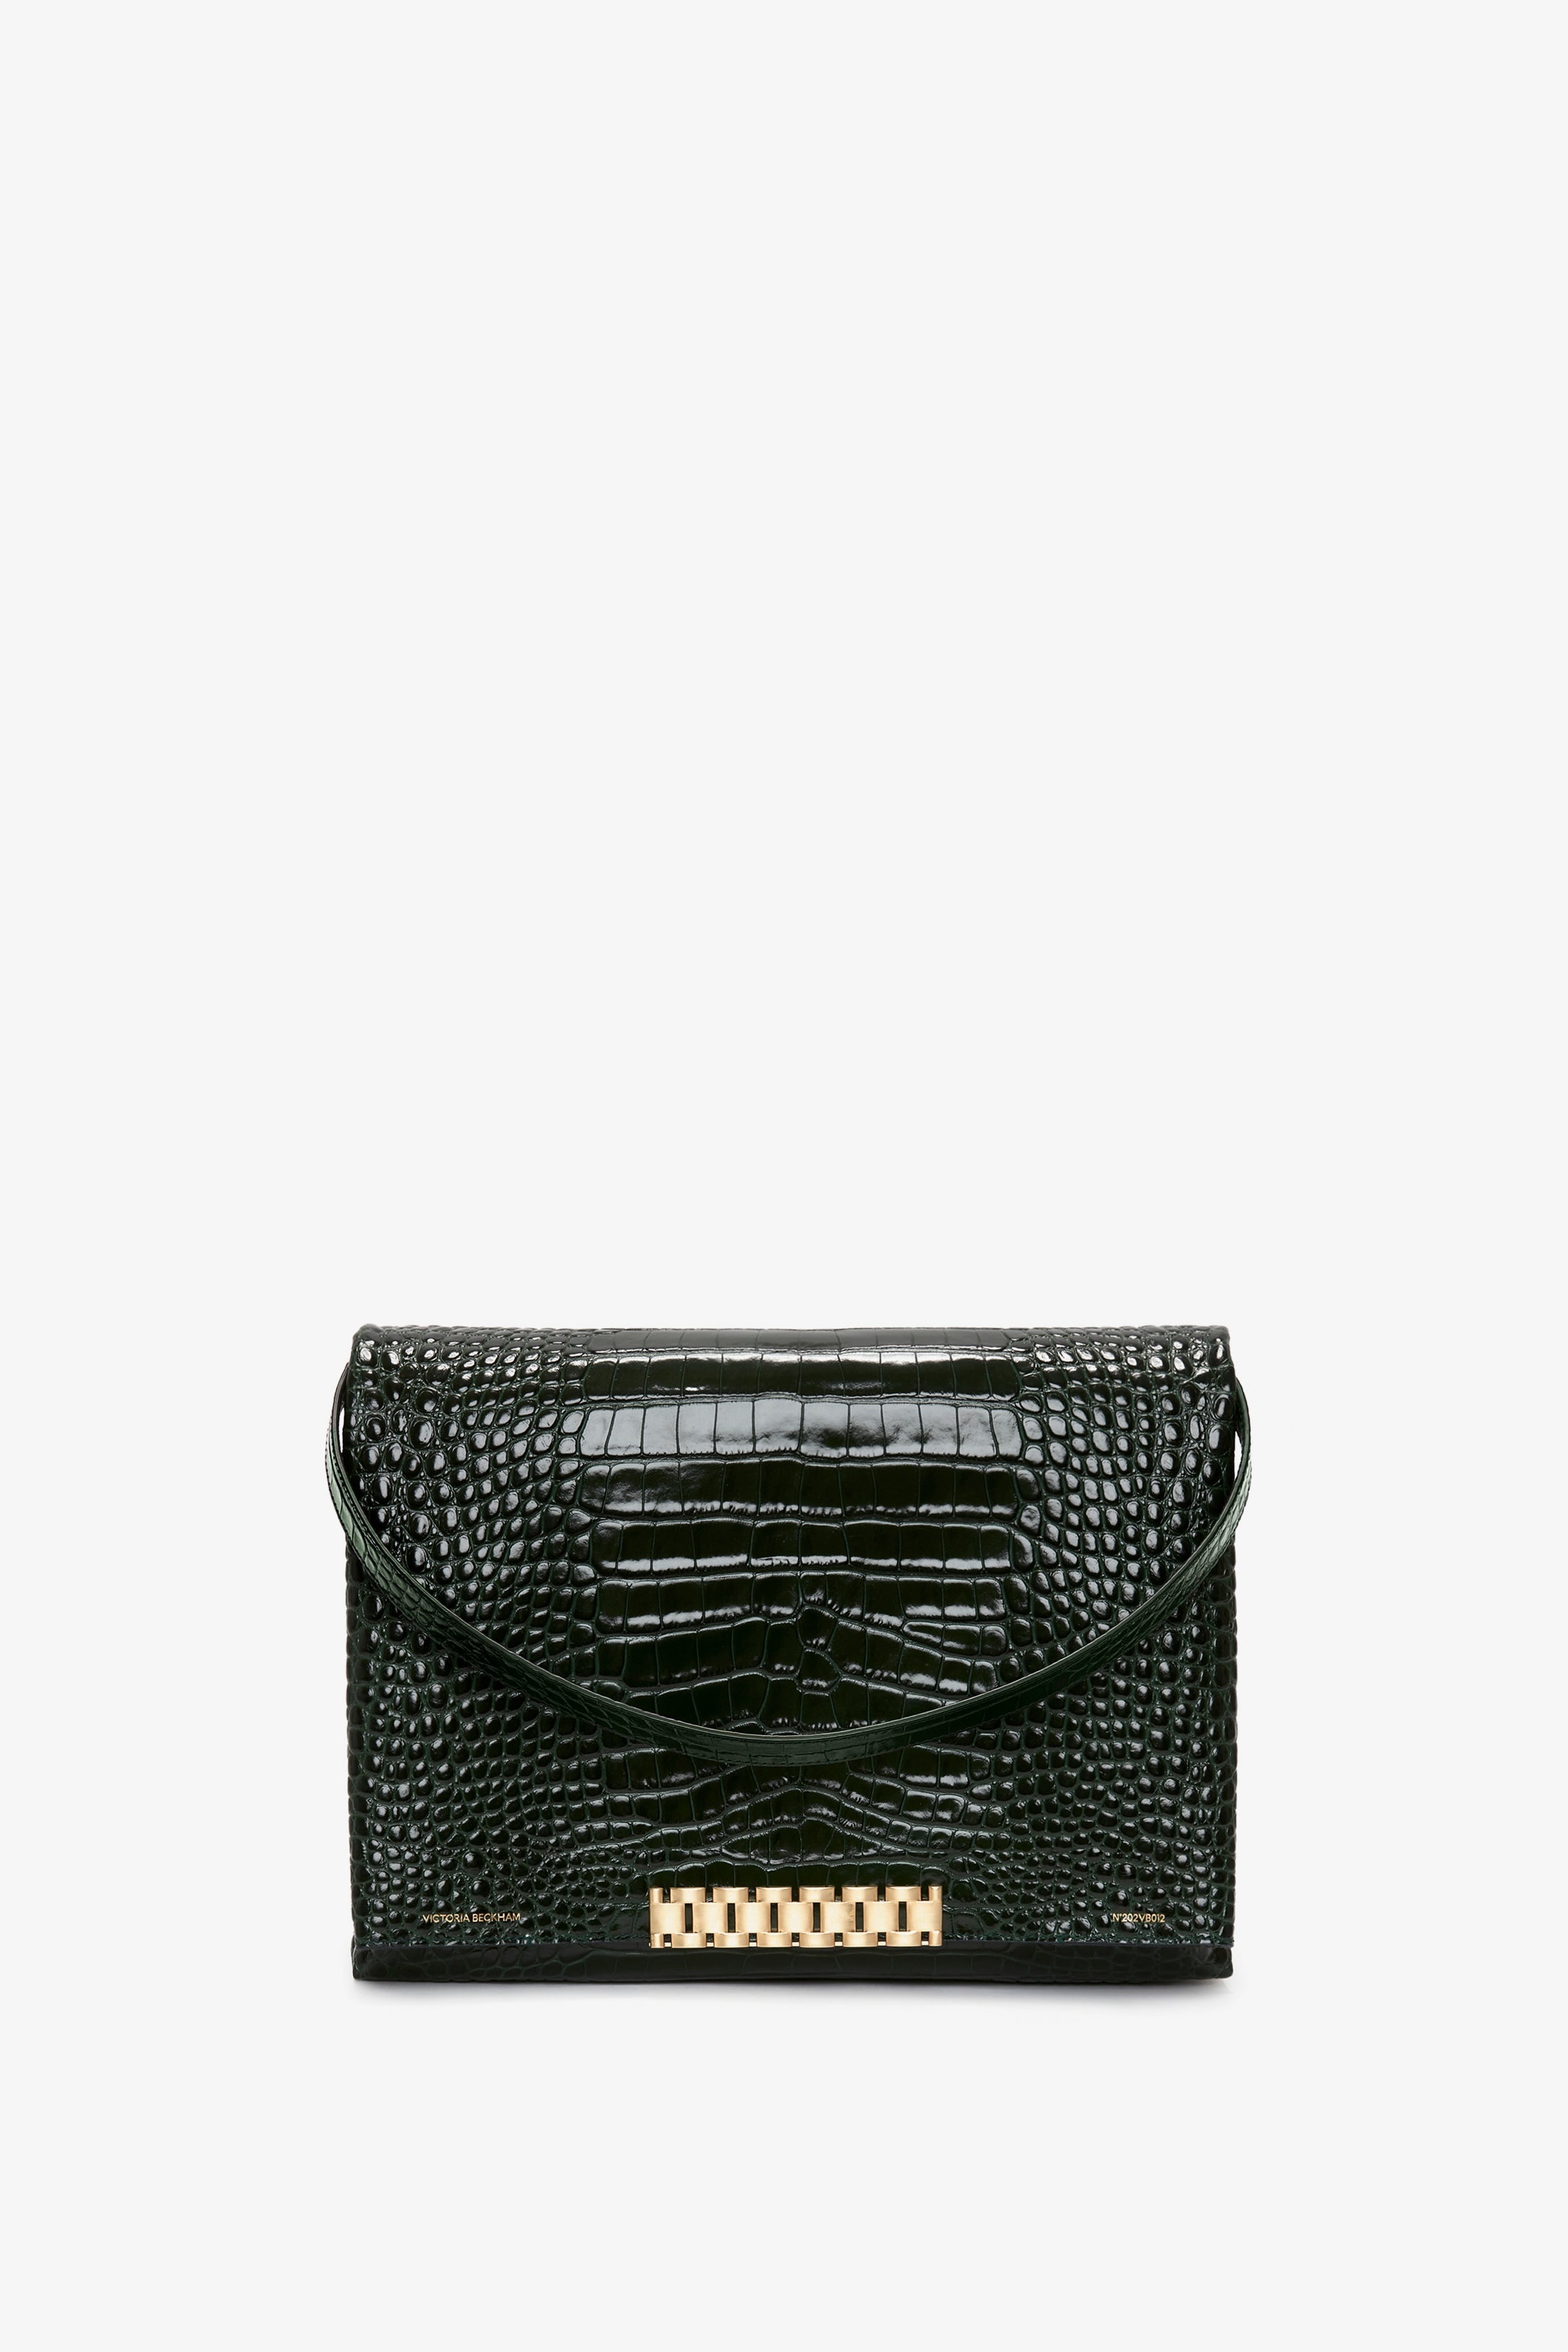 Jumbo Chain Pouch in Dark Forest Croc Leather - 2